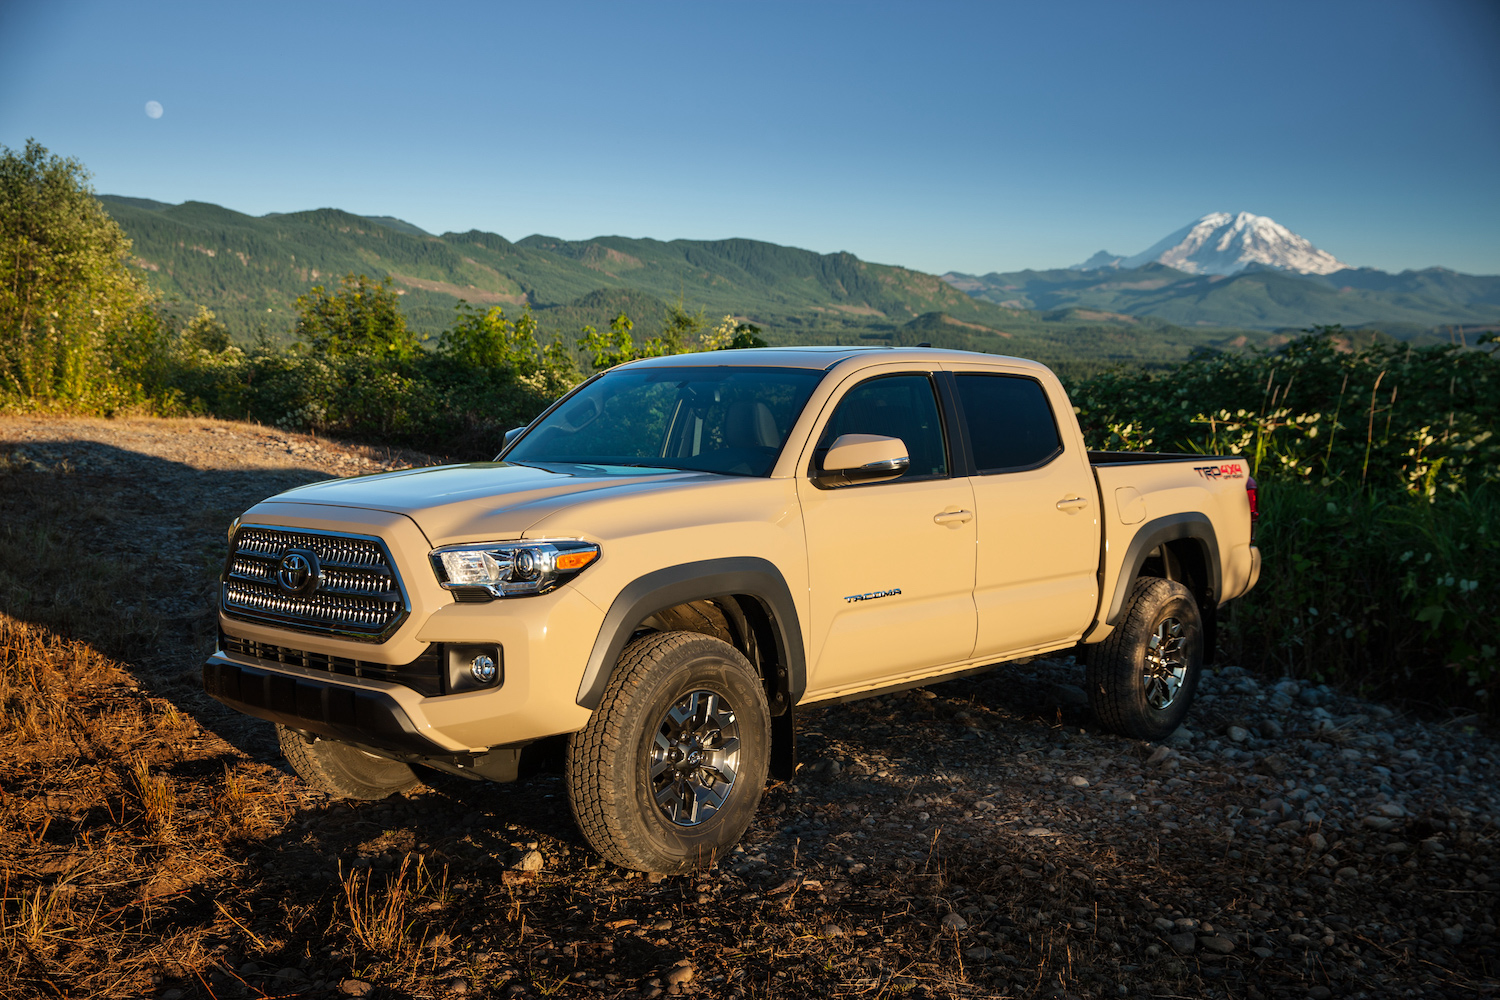 A tan 2017 Toyota Tacoma parked in front of mountains, the 2017 Toyota Tacoma is one of the best used trucks under $30K